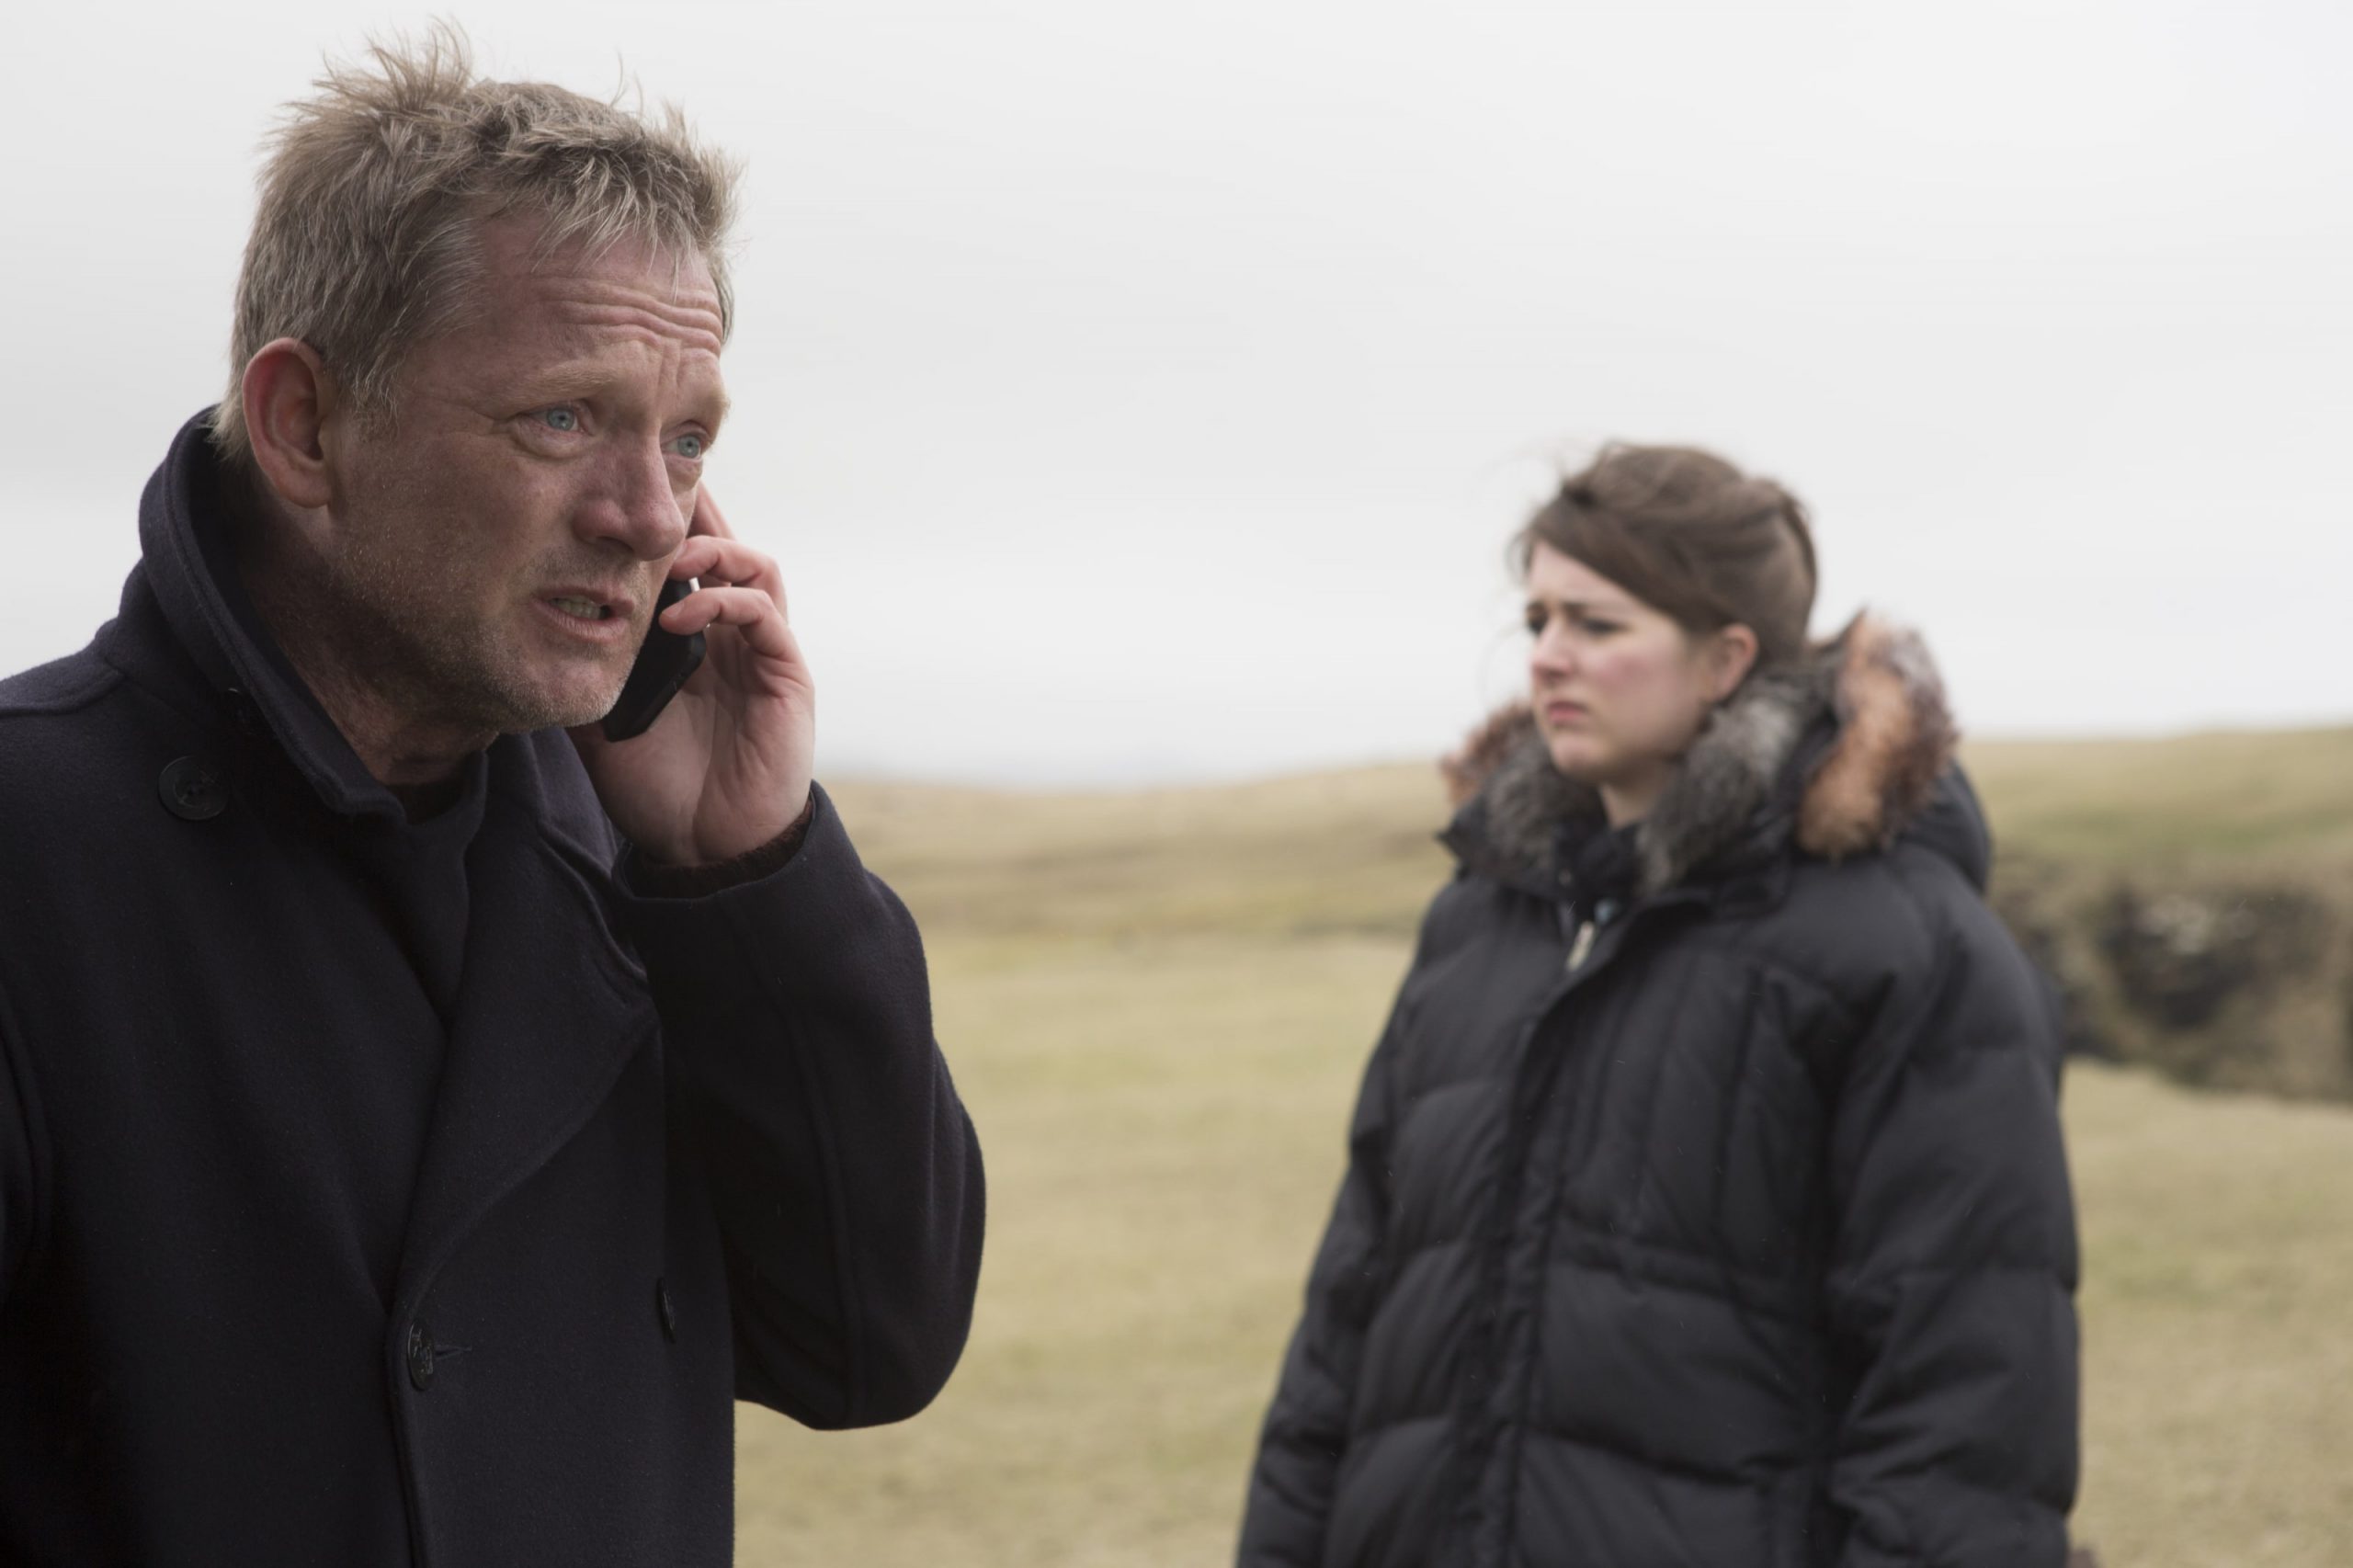 Shetland Season 7 Plot, Recap, Cast, Release Date, And Other Exciting